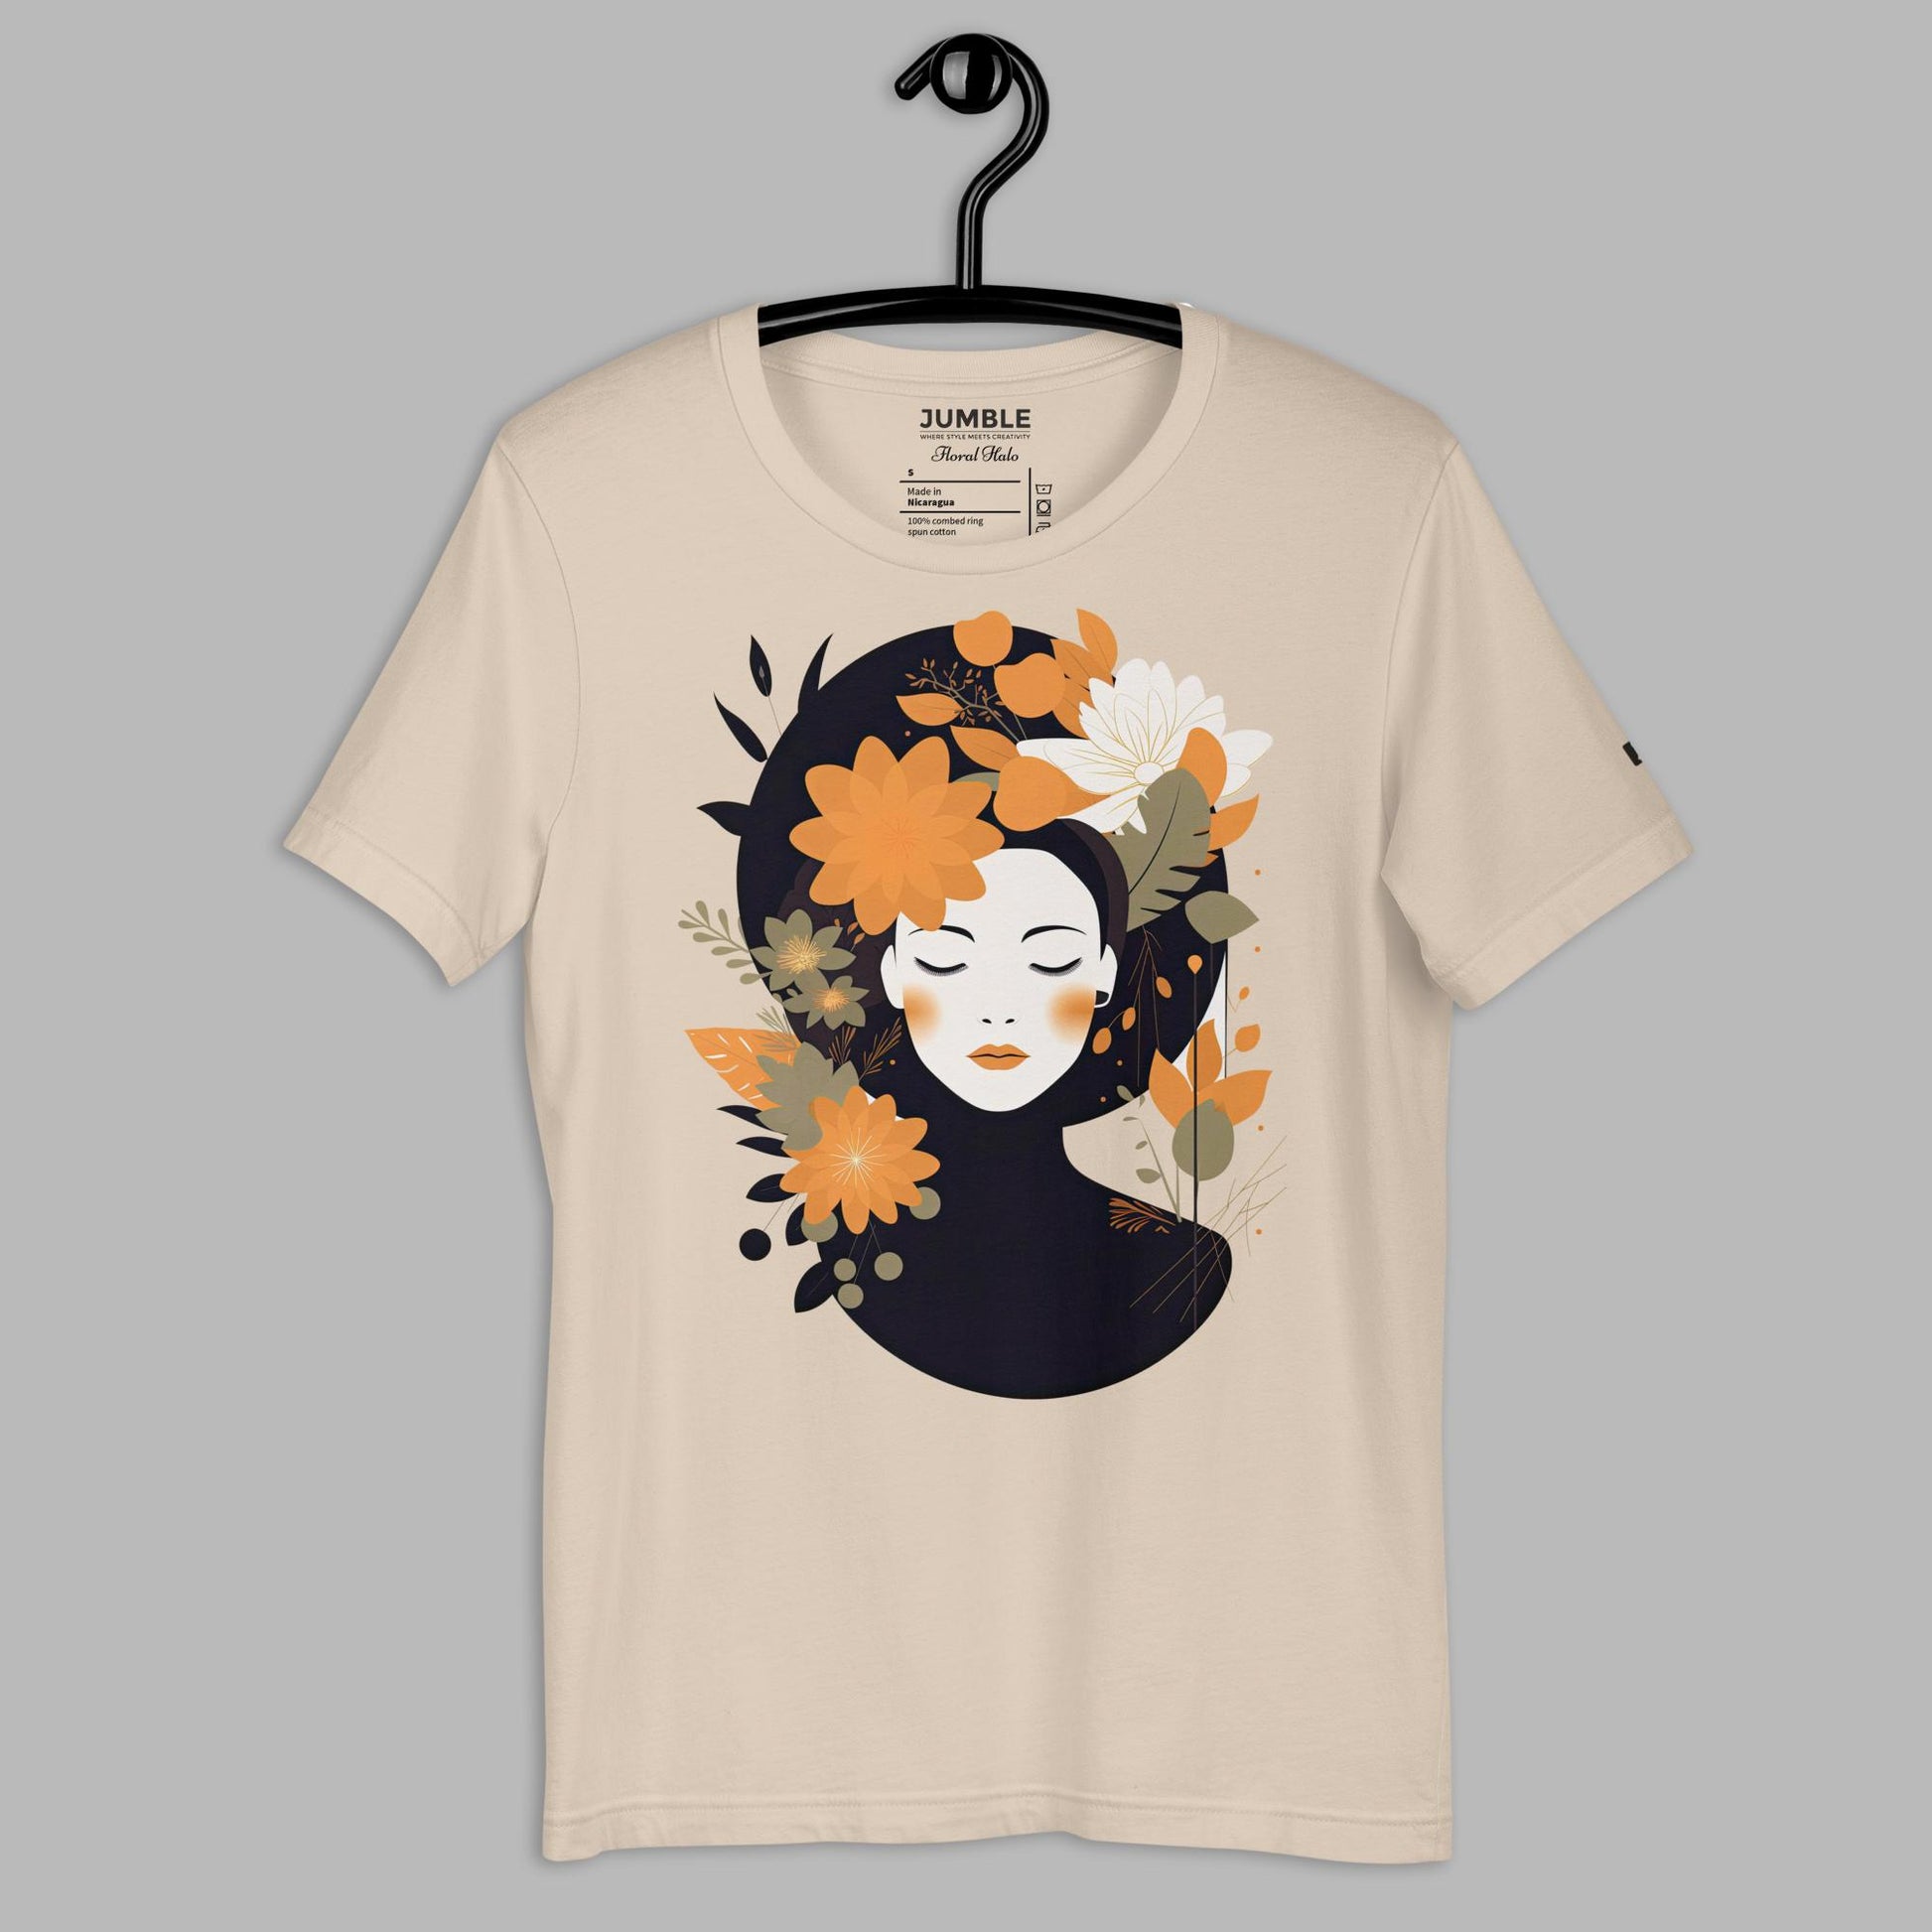 Floral Halo Unisex t-shirt, in soft cream. Displayed on hanger